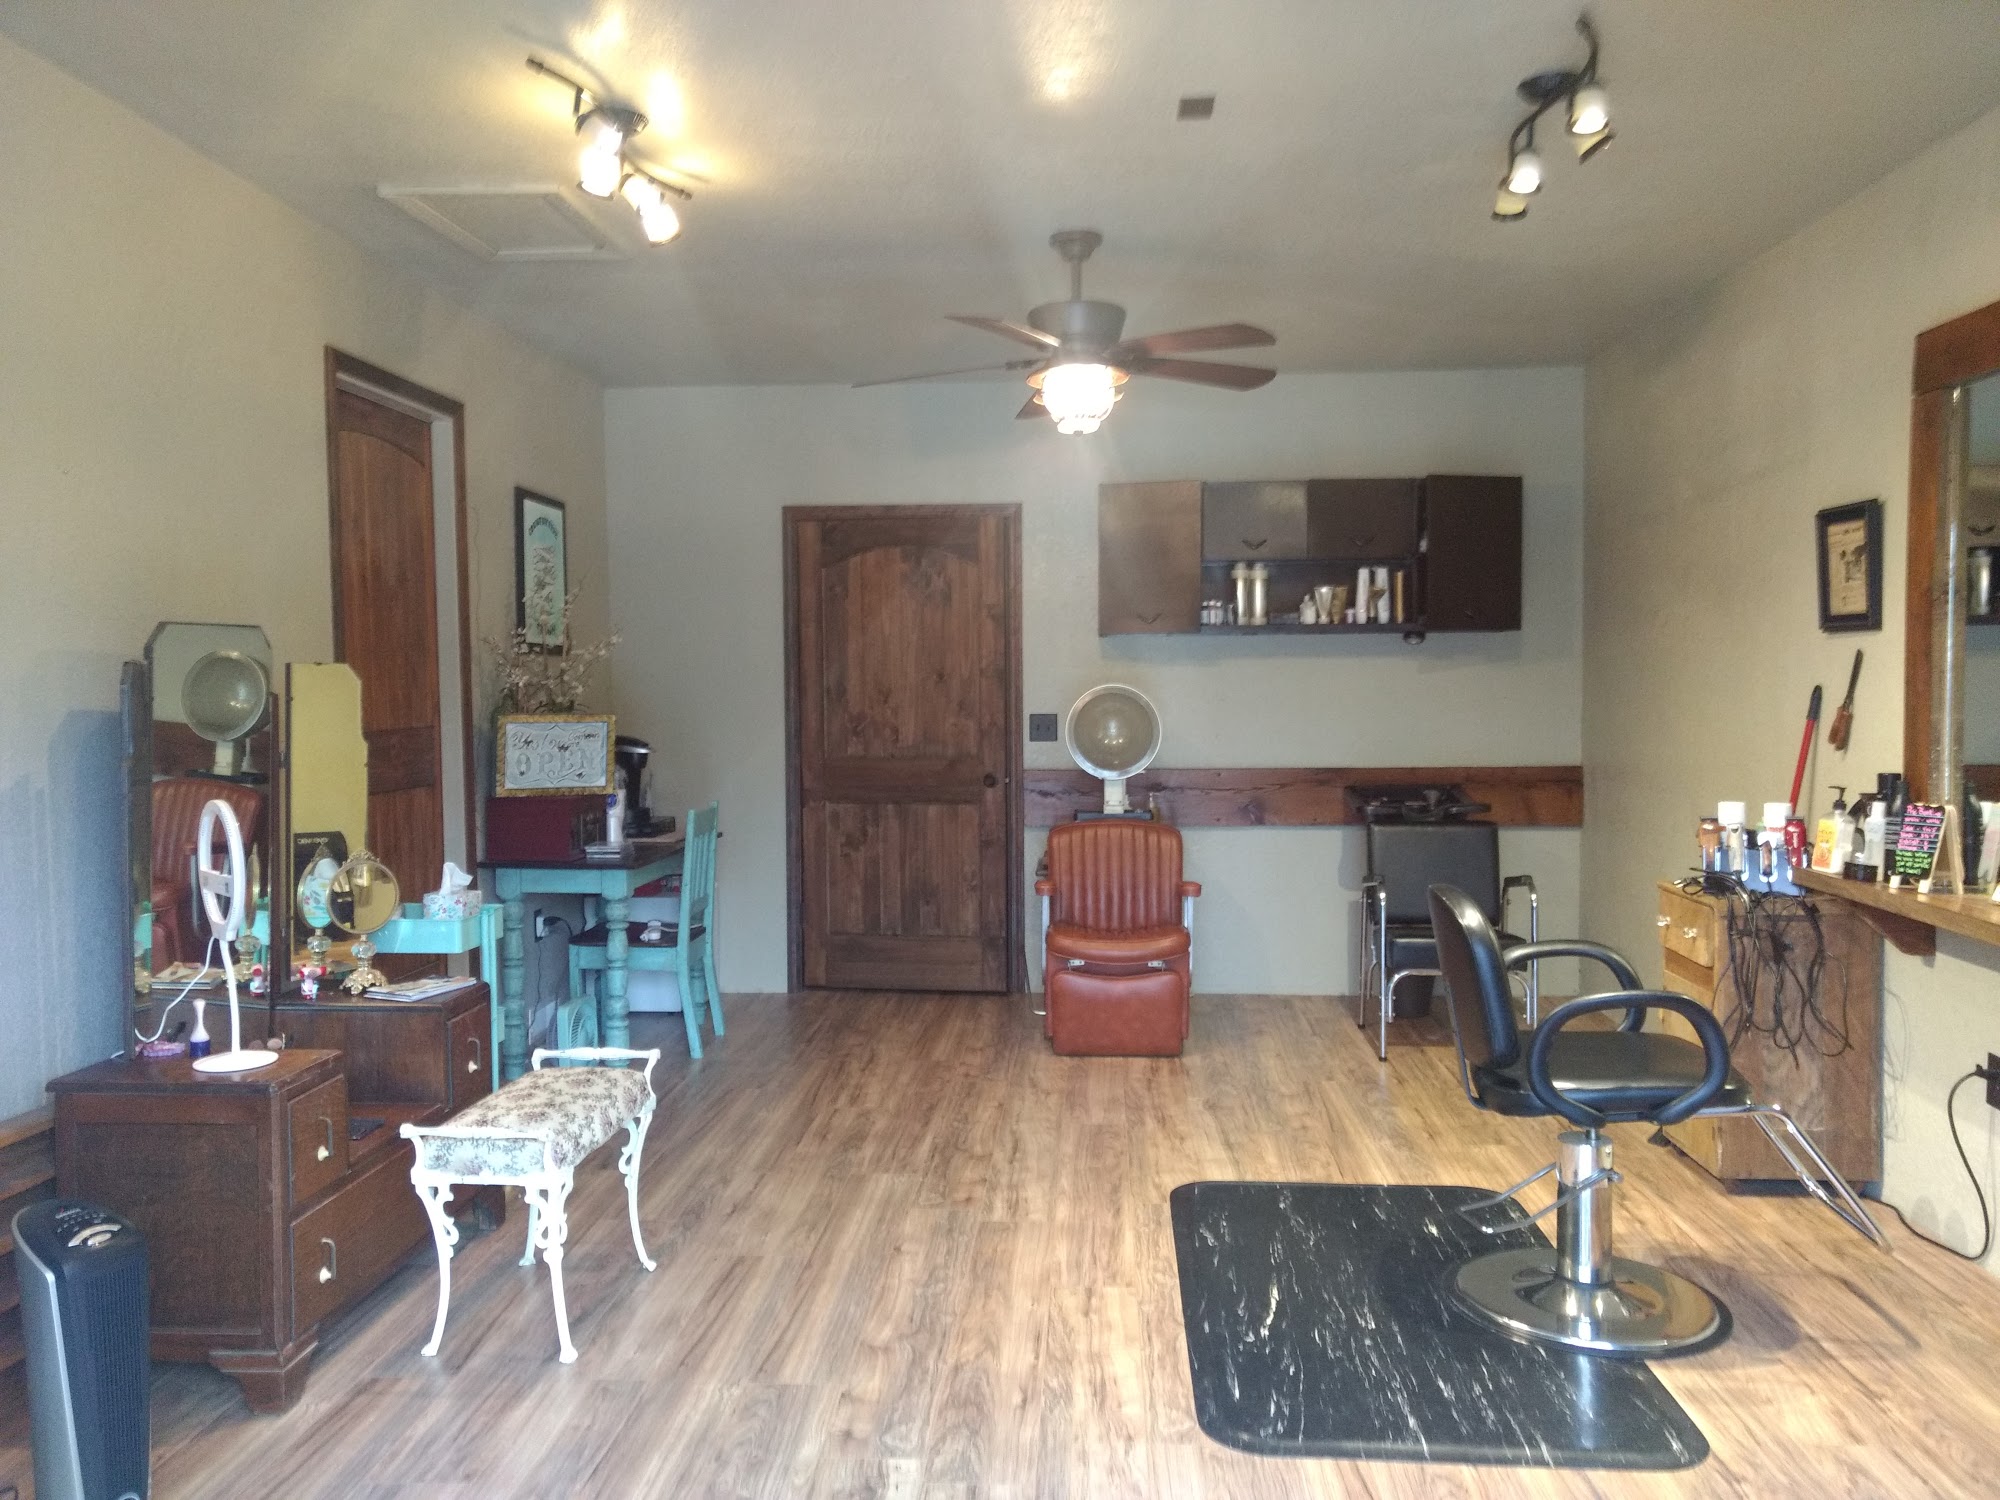 Countryside Salon not taking new clients